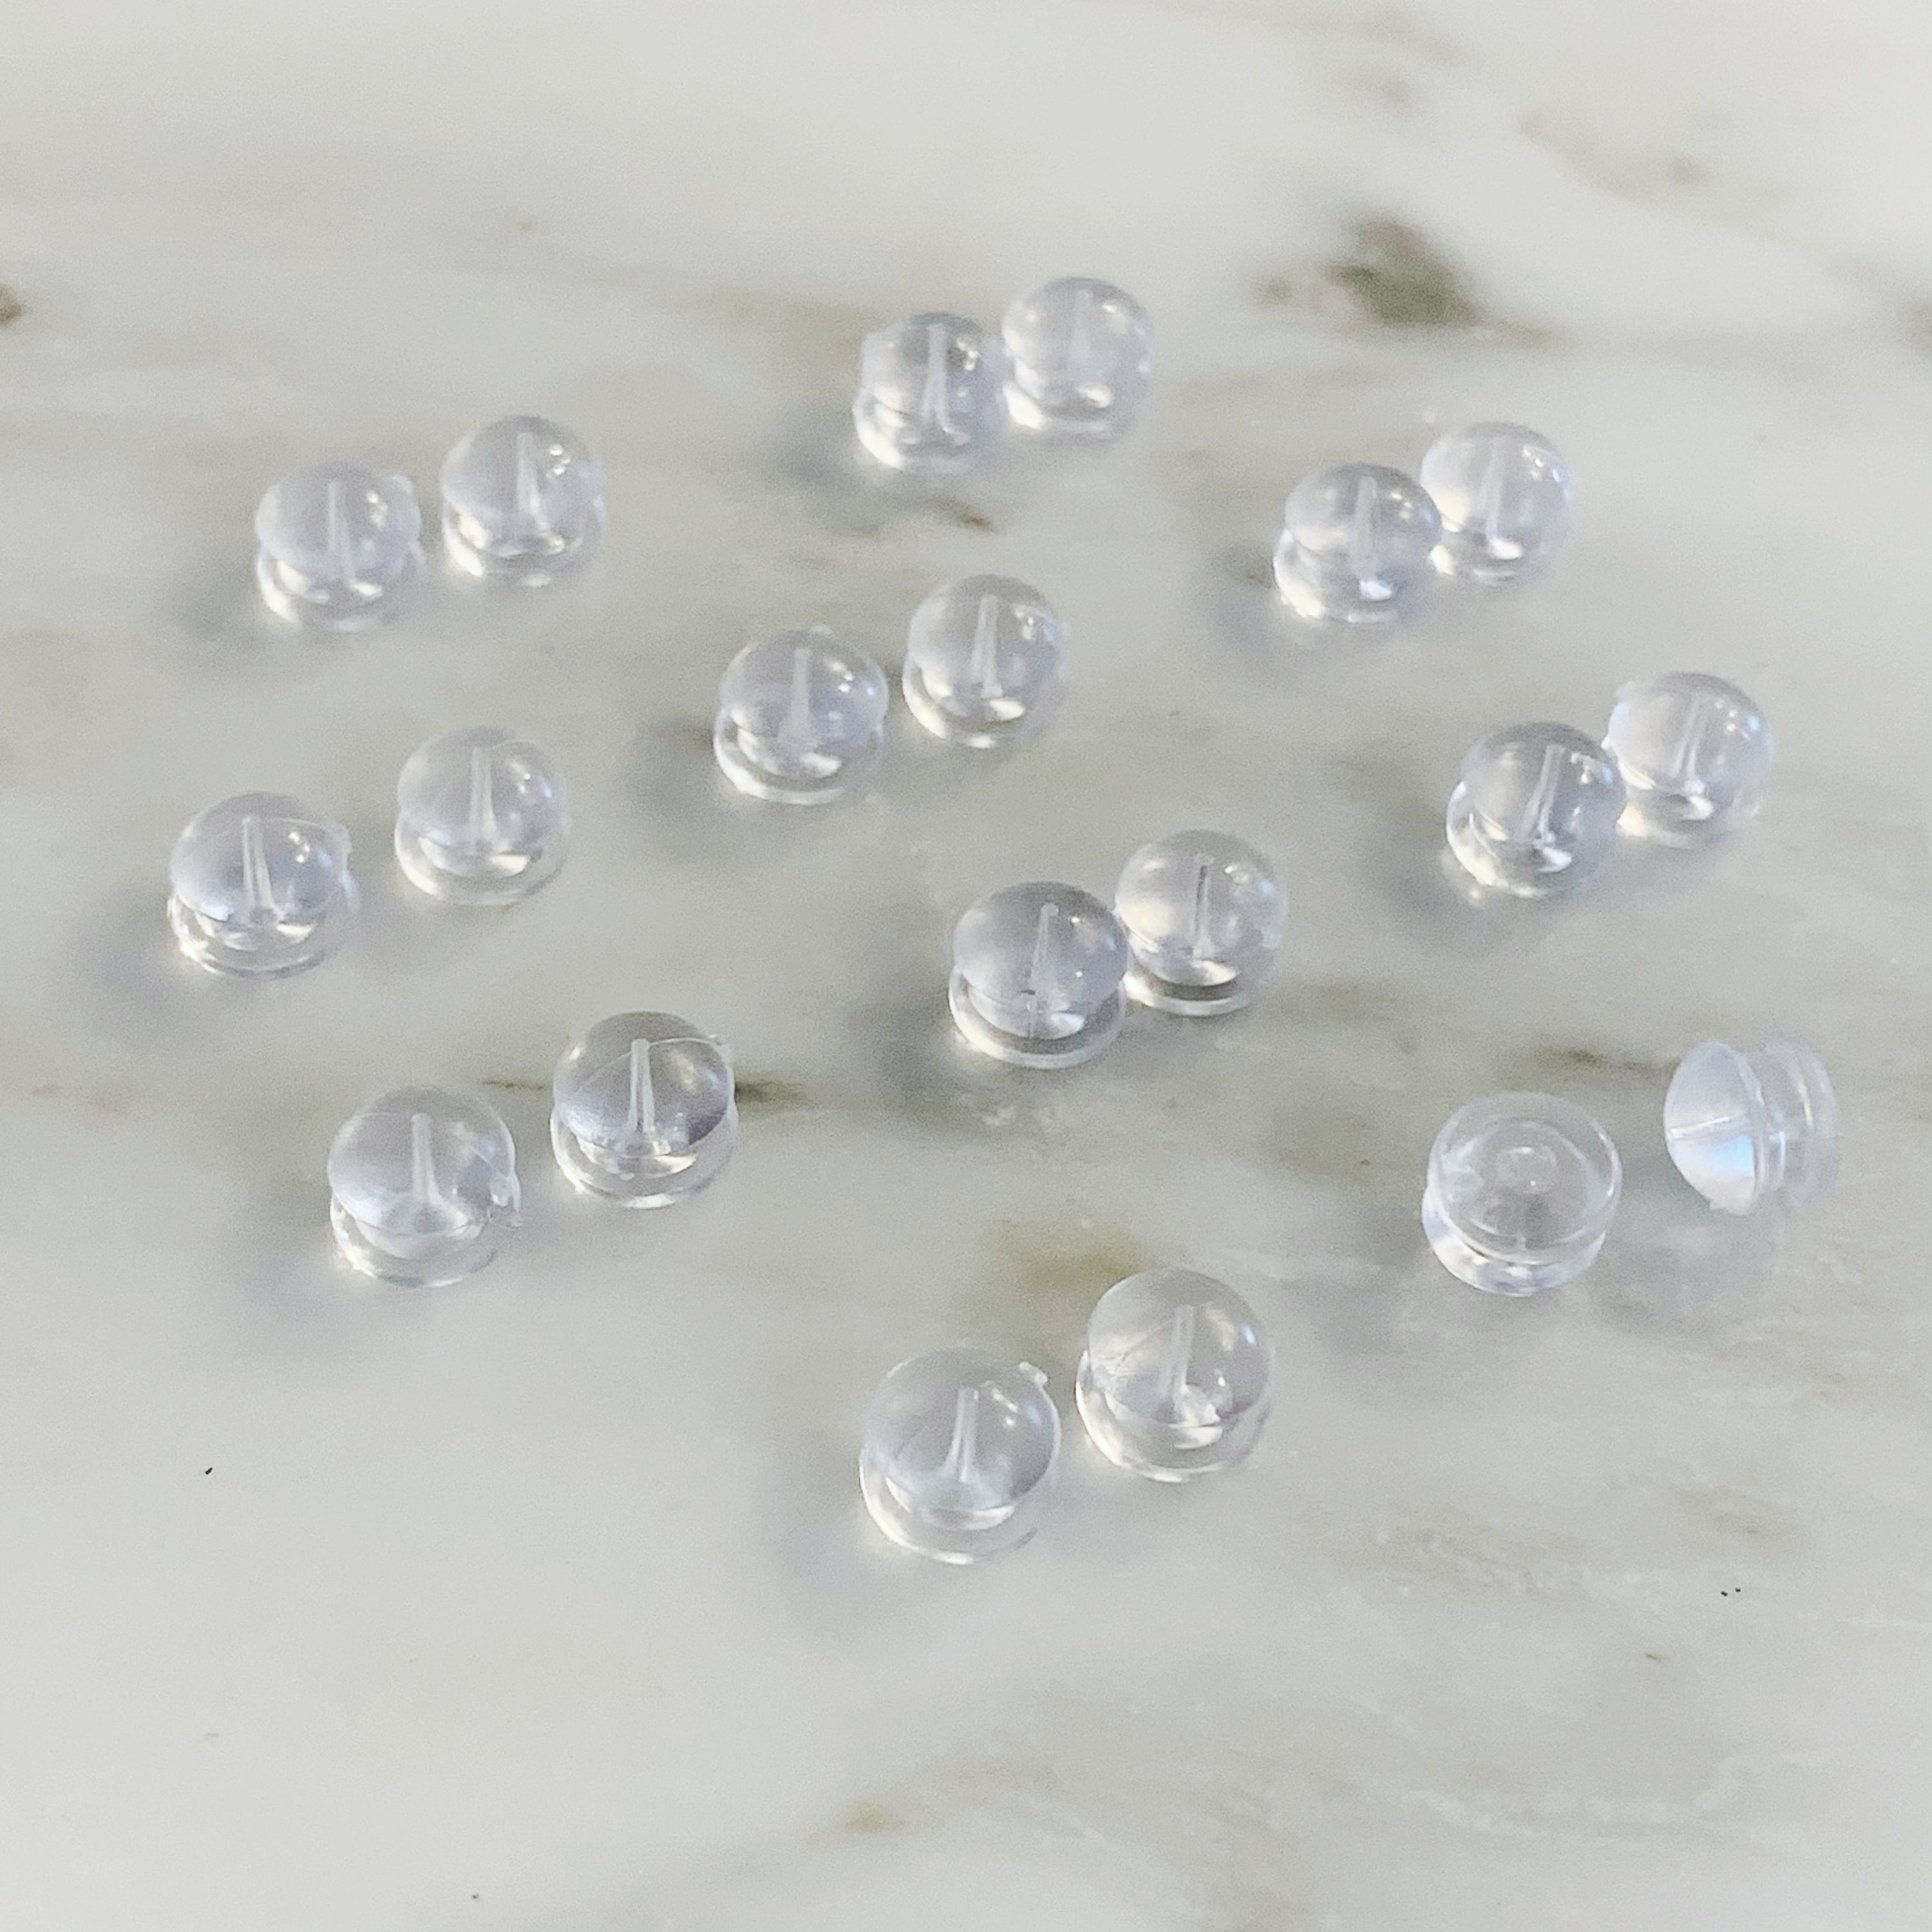  Clear Silicone Earring Backs - 20 Pcs / 10 Pairs Hypoallergenic  Secure Push-Back Earring Stoppers for Stud Earrings